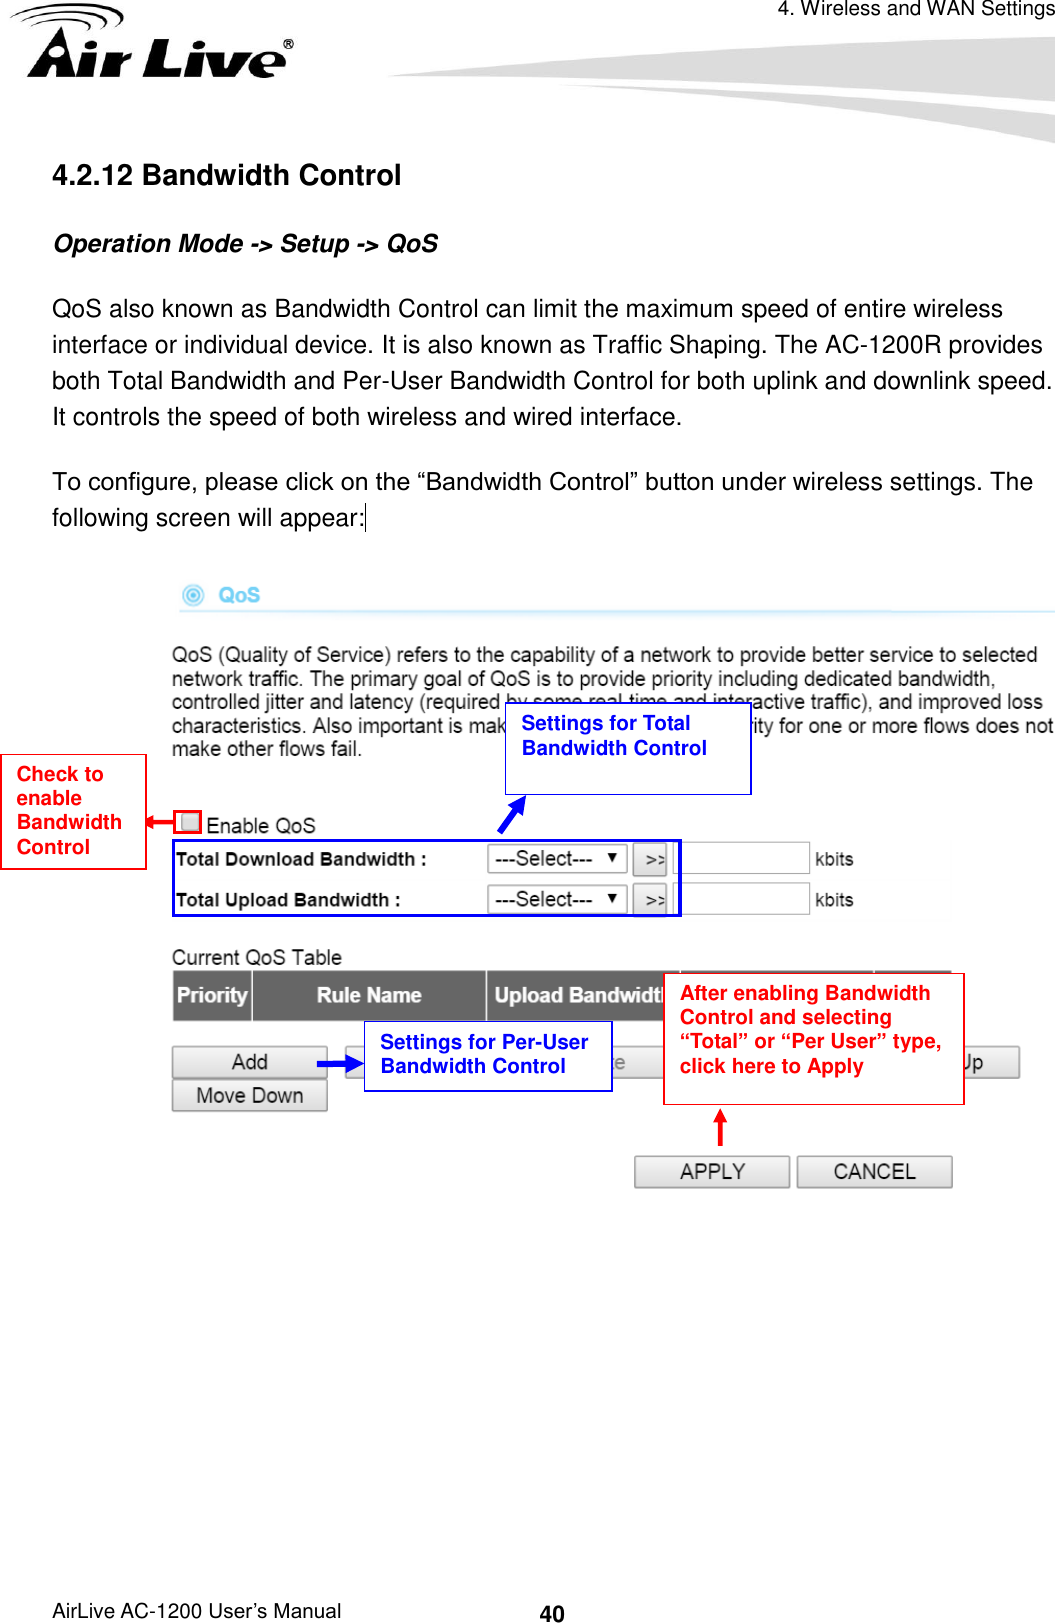 4. Wireless and WAN Settings AirLive AC-1200 User’s Manual 40 4.2.12 Bandwidth Control Operation Mode -&gt; Setup -&gt; QoS QoS also known as Bandwidth Control can limit the maximum speed of entire wireless interface or individual device. It is also known as Traffic Shaping. The AC-1200R provides both Total Bandwidth and Per-User Bandwidth Control for both uplink and downlink speed. It controls the speed of both wireless and wired interface. To configure, please click on the “Bandwidth Control” button under wireless settings. The following screen will appear:   Check to enable Bandwidth Control After enabling Bandwidth Control and selecting “Total” or “Per User” type, click here to Apply Settings for Total Bandwidth Control Settings for Per-User Bandwidth Control 